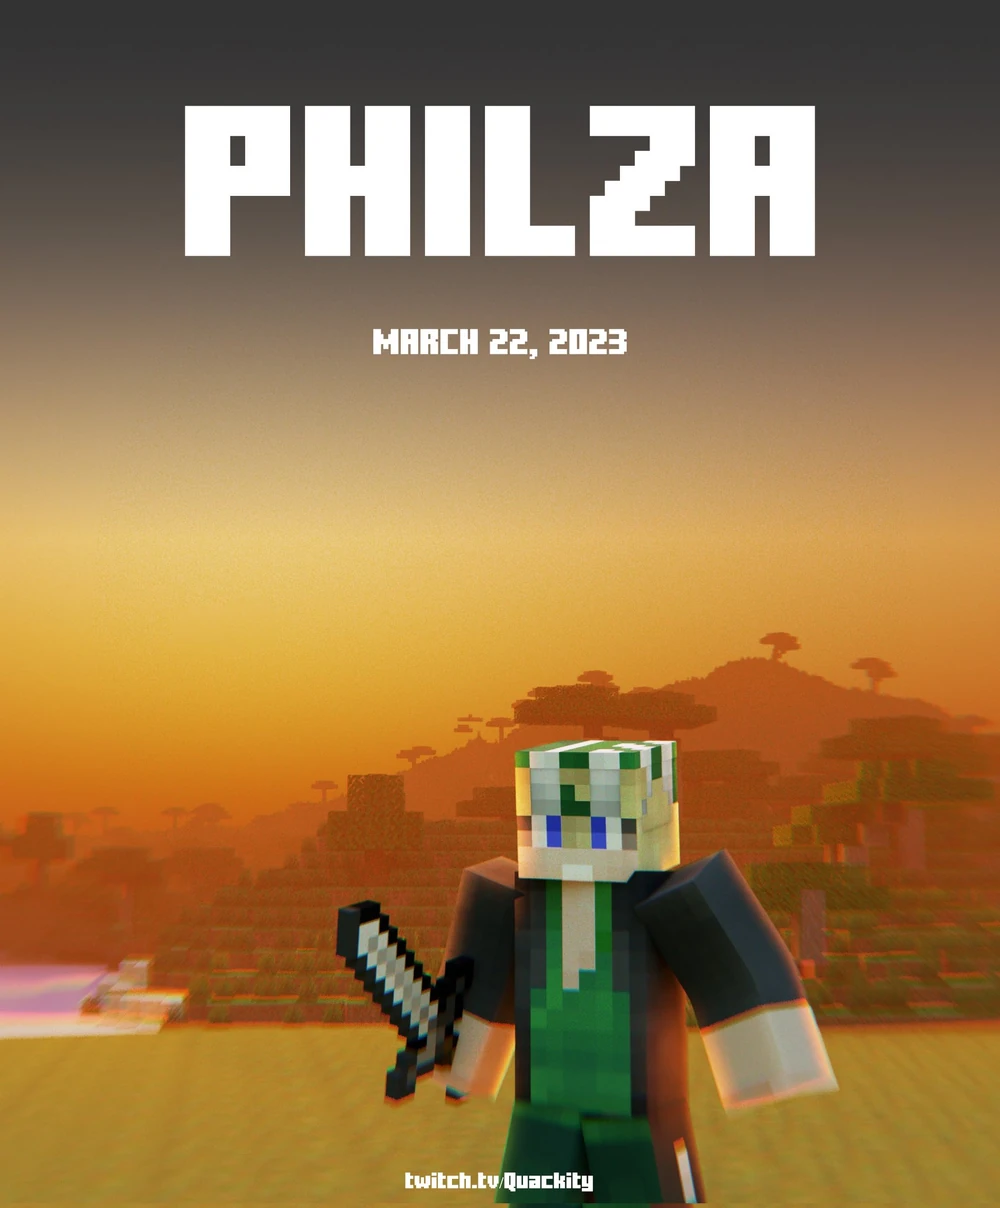 Official announcement poster for Philza. His minecraft character is standing in an open empty field with a savannah mountain in the background as the sun is setting. He holds an iron sword and is ready to fight. However, his minecraft skin looks weird and messed up in a funny way, like his hat and hair have become one.